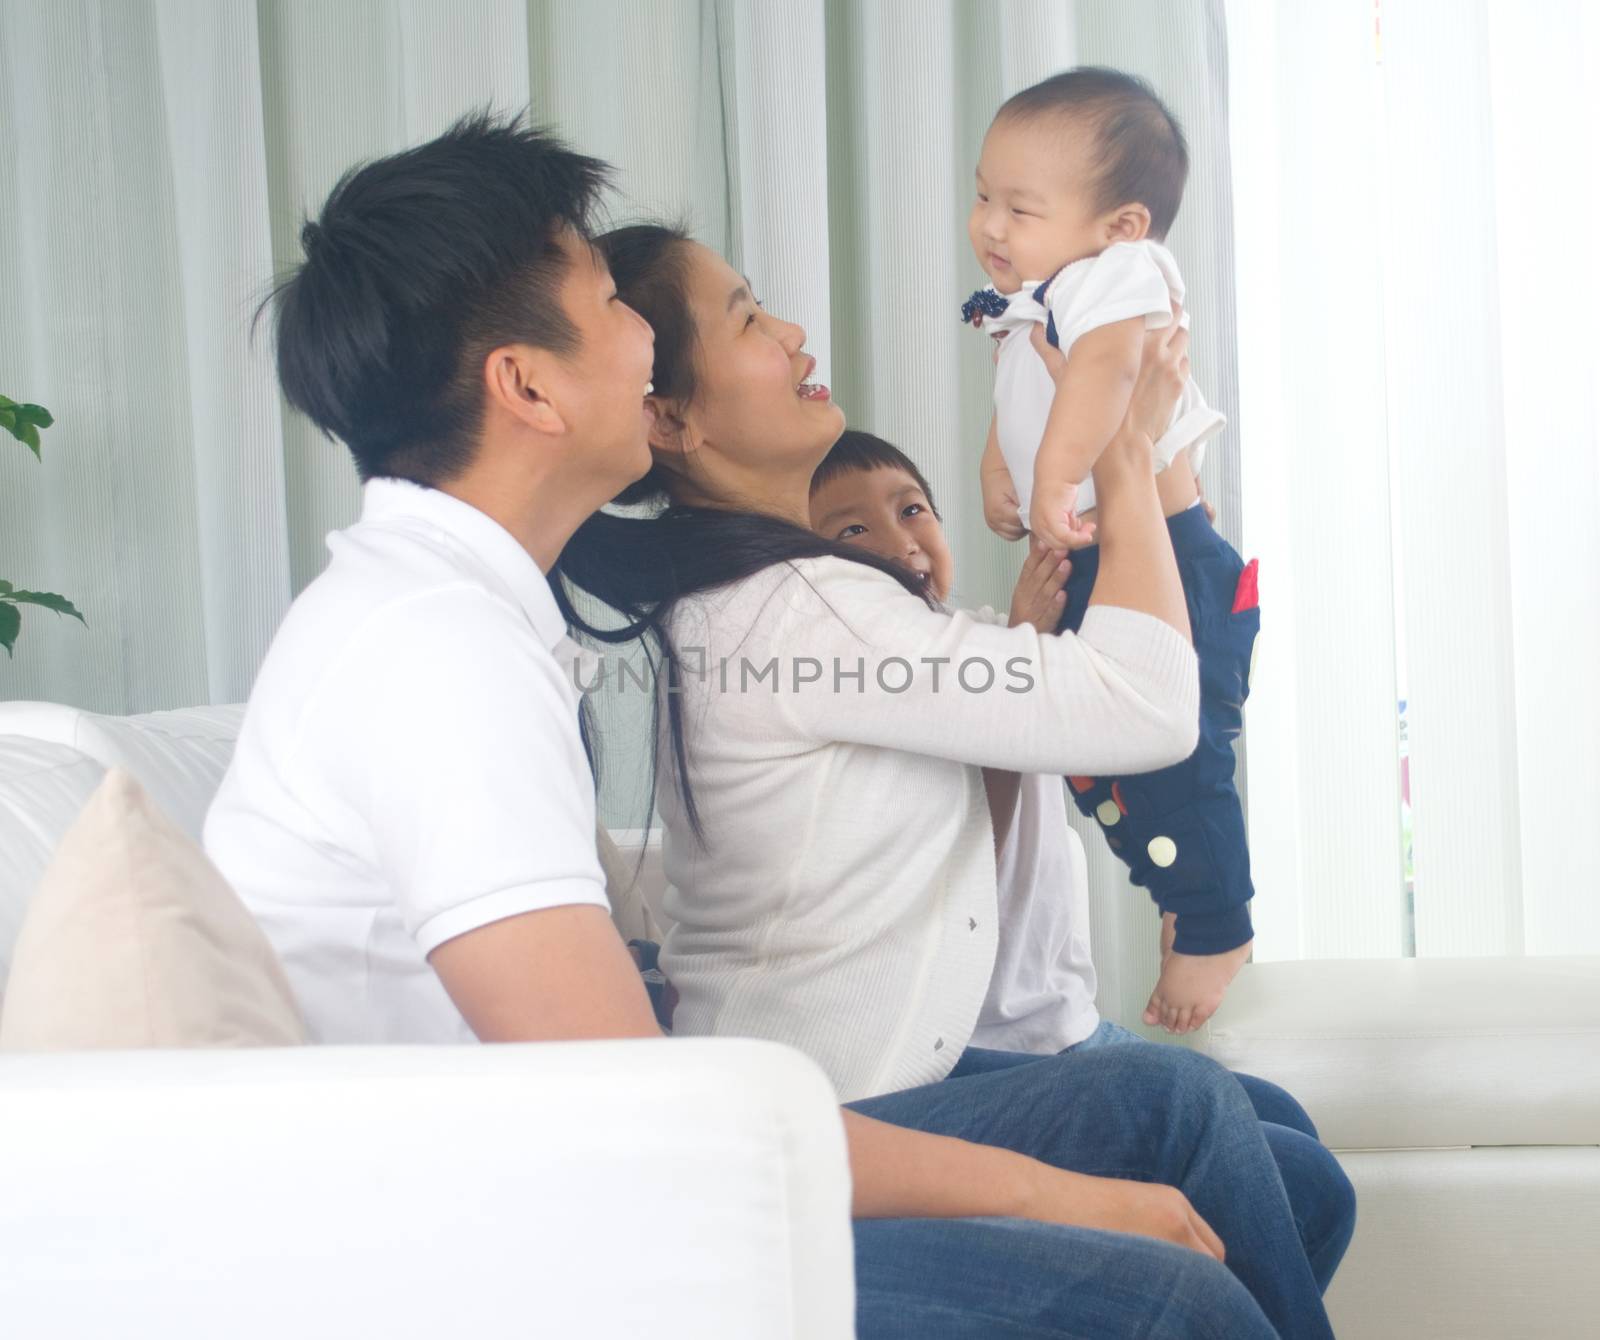 Asian family playing with baby